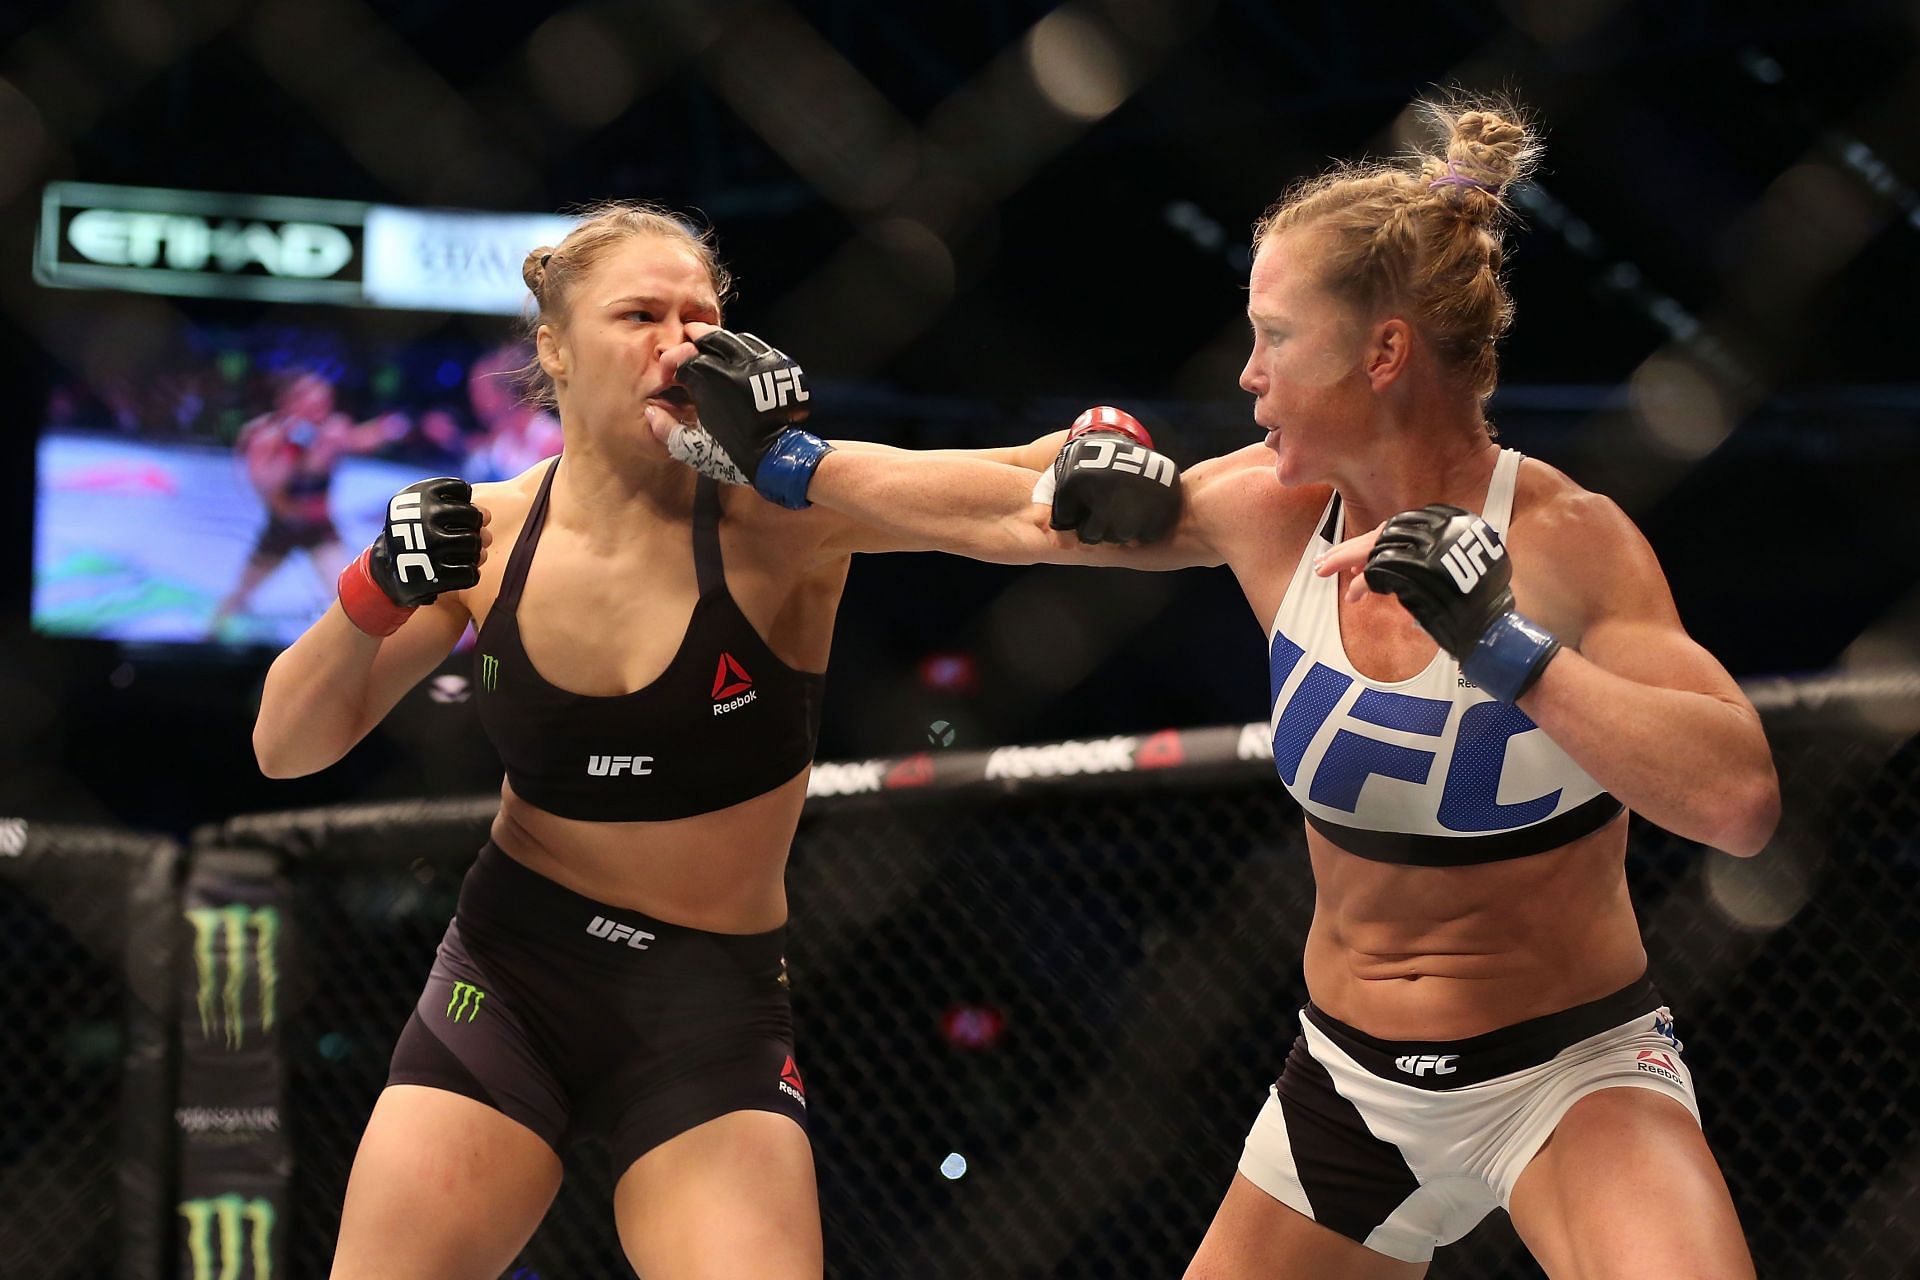 Holly Holm has a record of 14-6